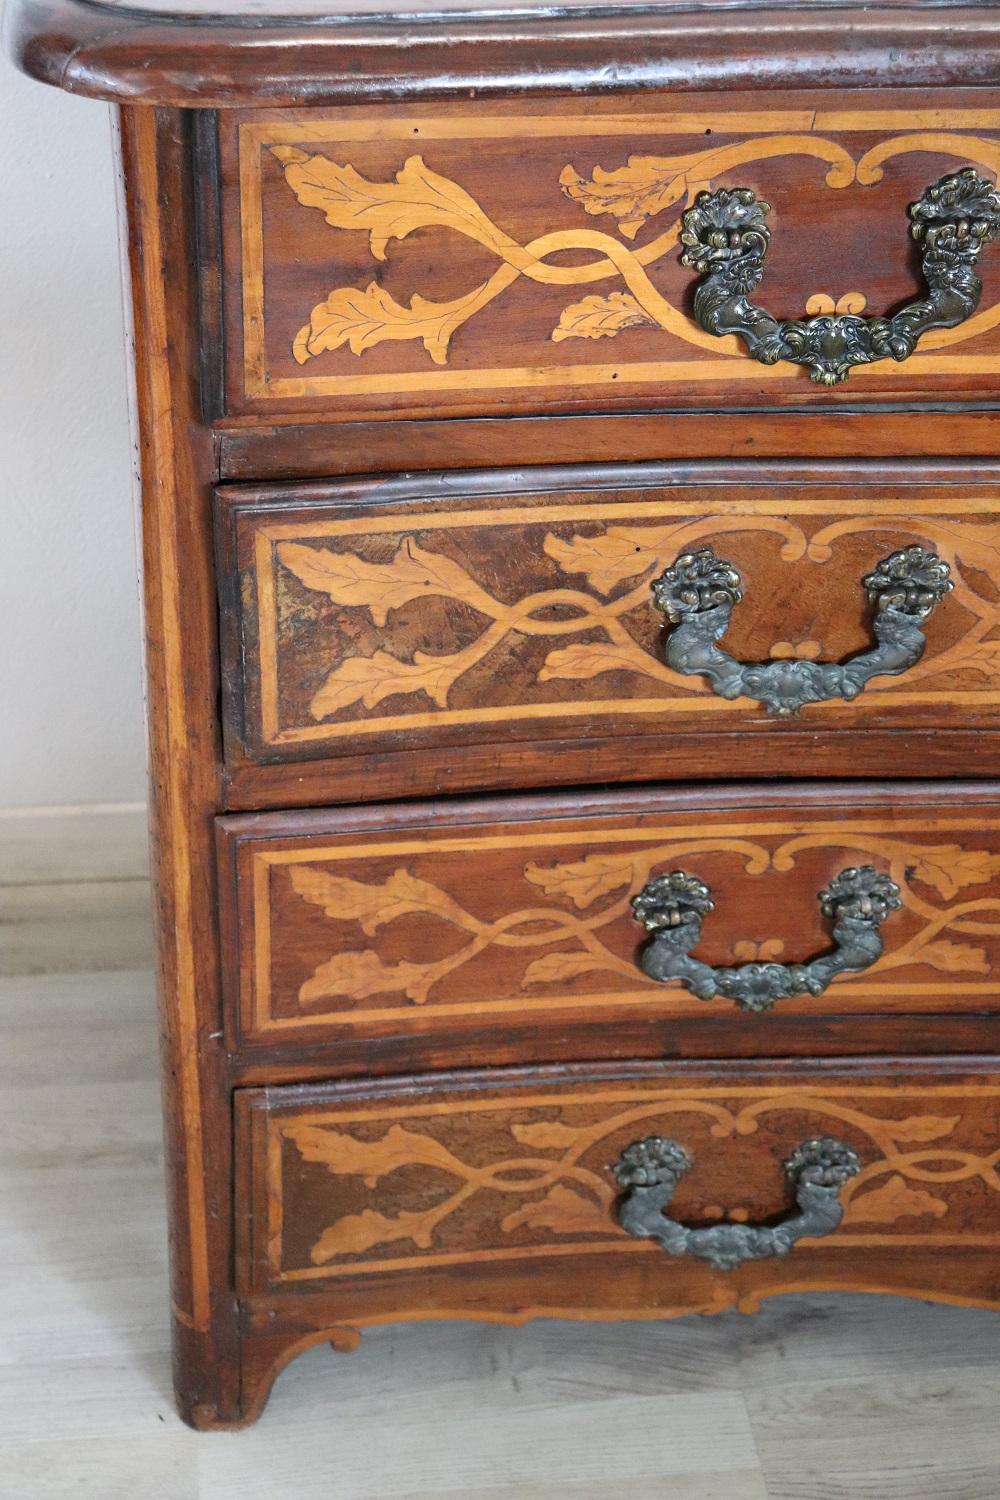 17th Century Italian Louis XIV Walnut Inlaid Antique Commode or Chest of Drawers In Good Condition For Sale In Casale Monferrato, IT